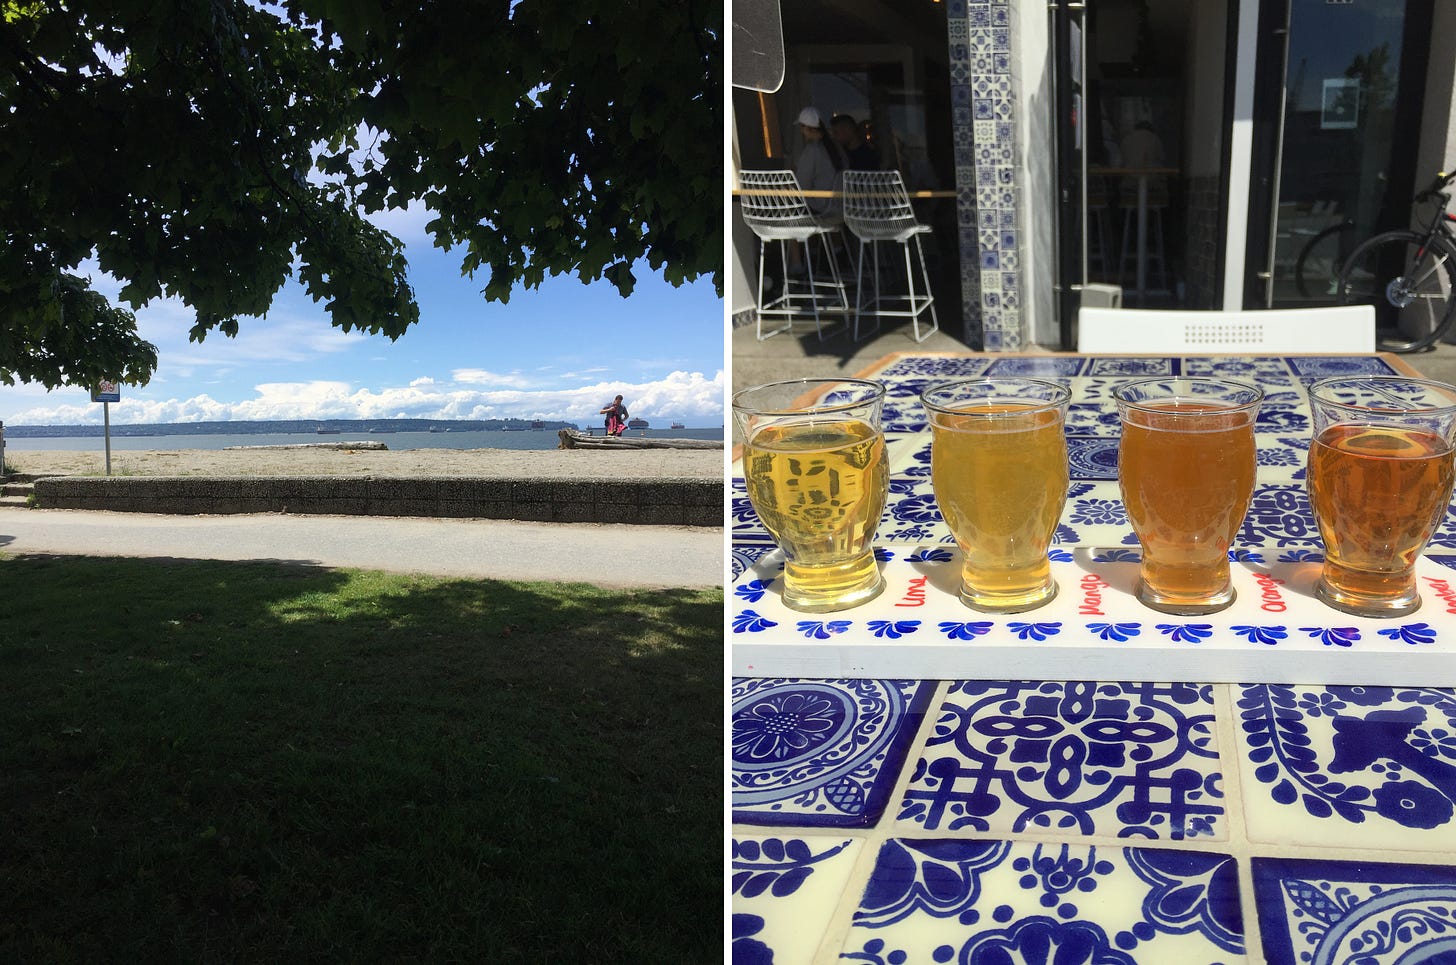 Left image: a tree canopy and a patch of grass in the foreground, a sunny beach and a sliver of ocean in the background. Right image: a flight of four beers on an outdoor table made of blue and white Mexican tiles.